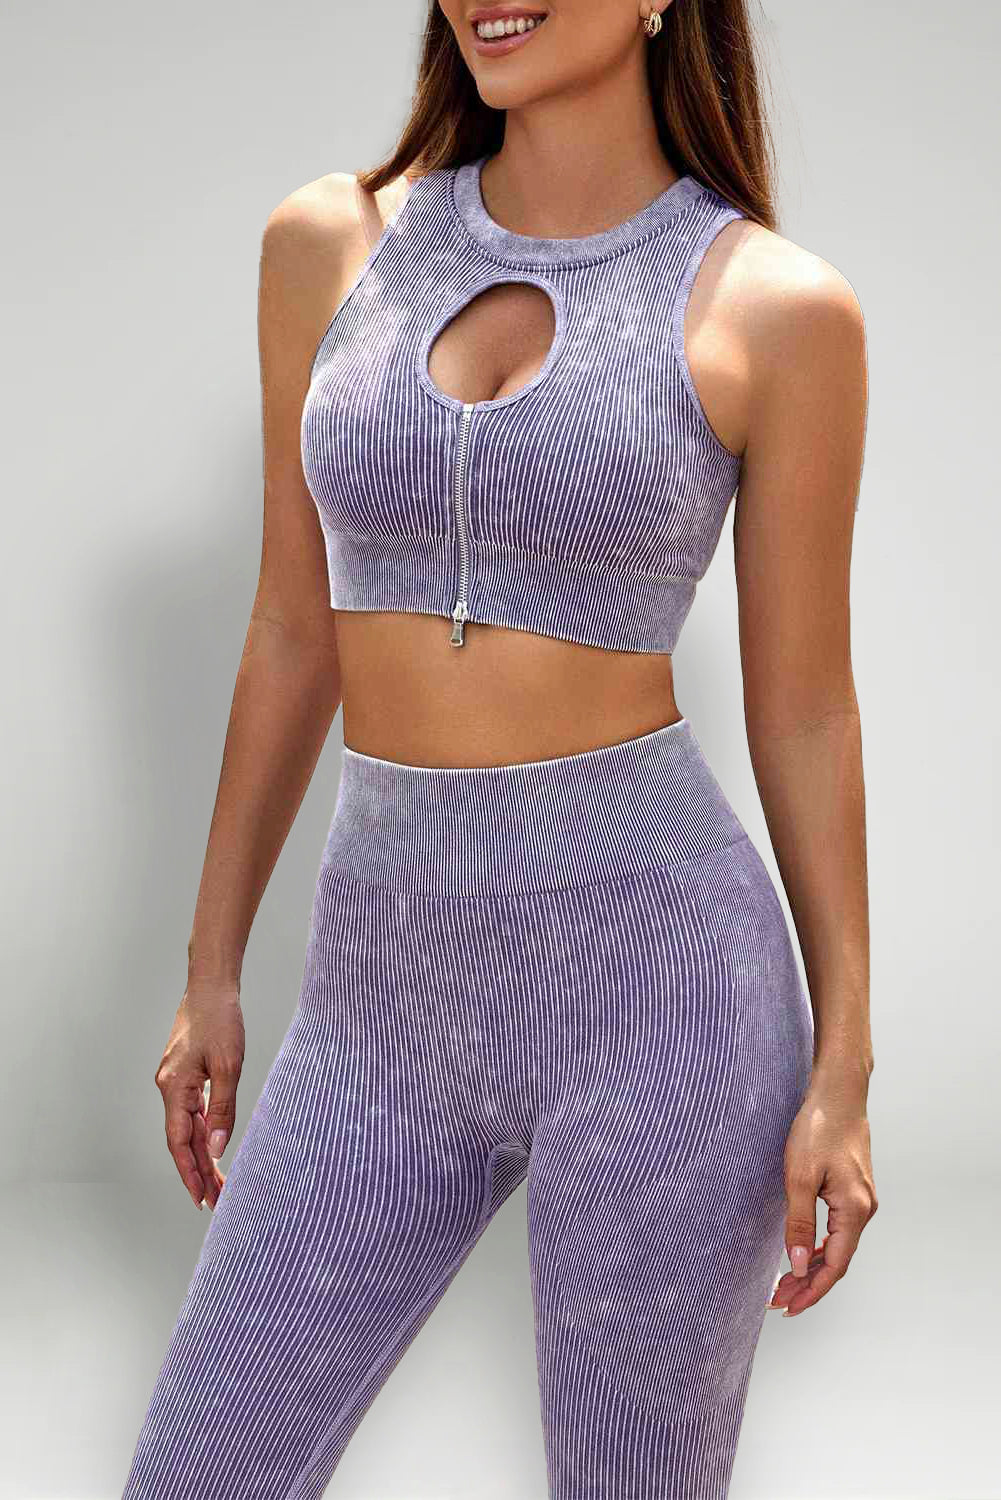 Cutout Zip-Front Cropped Sports Tank